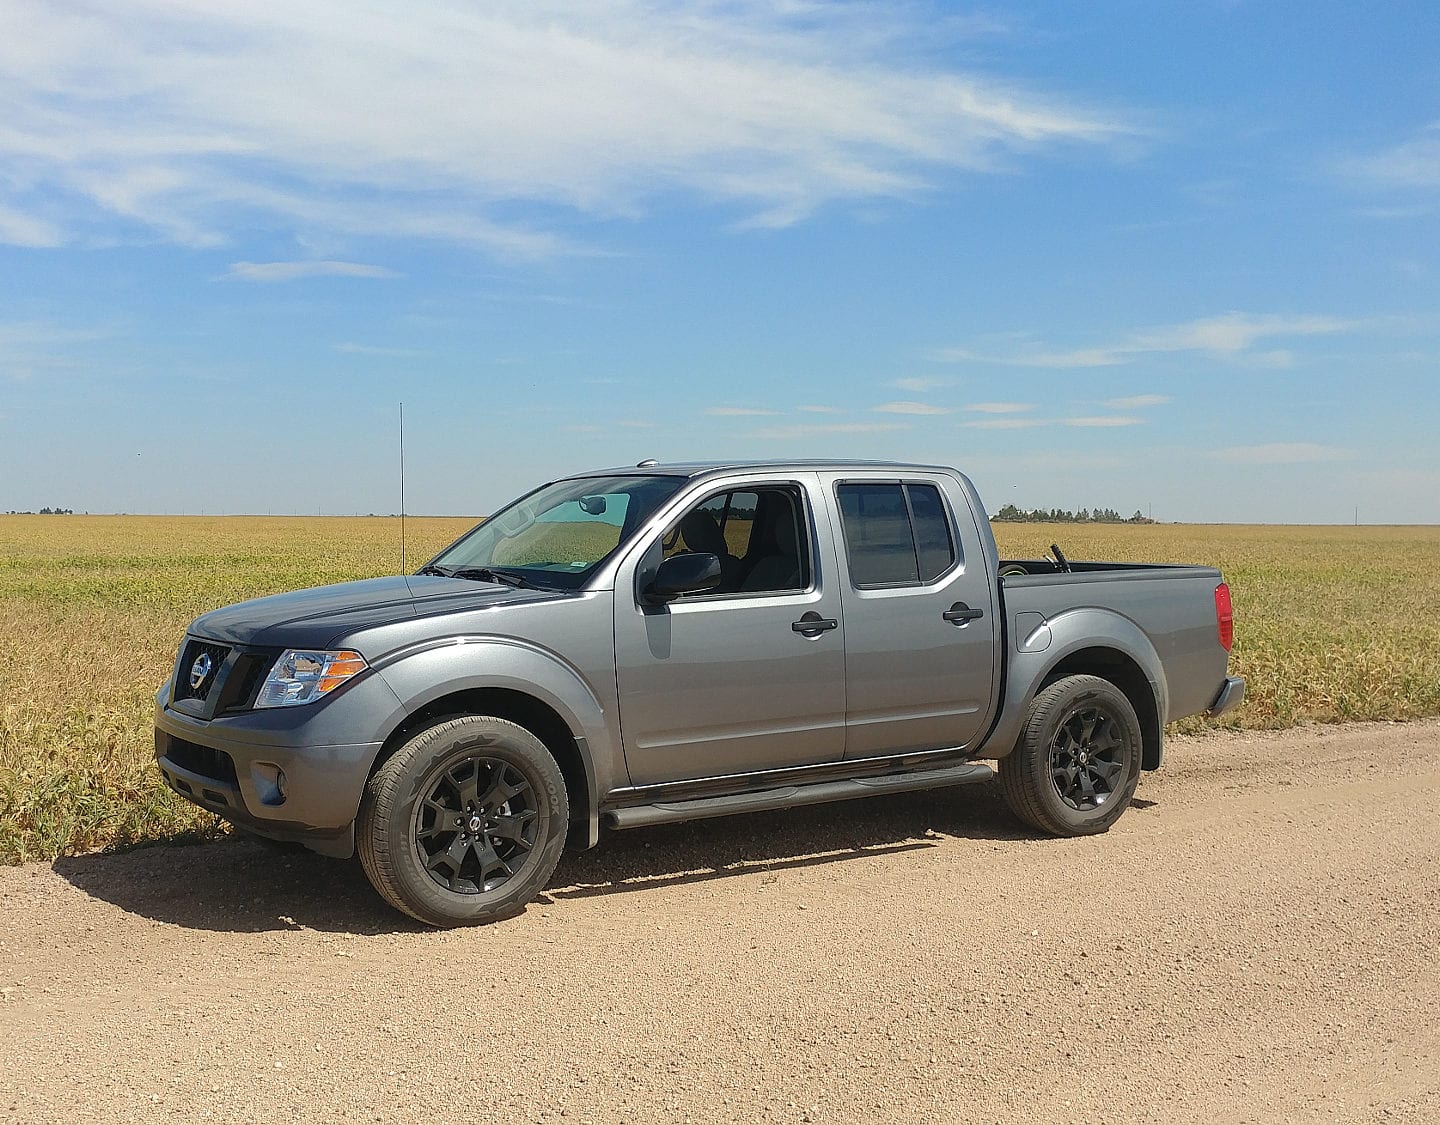 2018 Nissan Frontier is a Trucky Truck